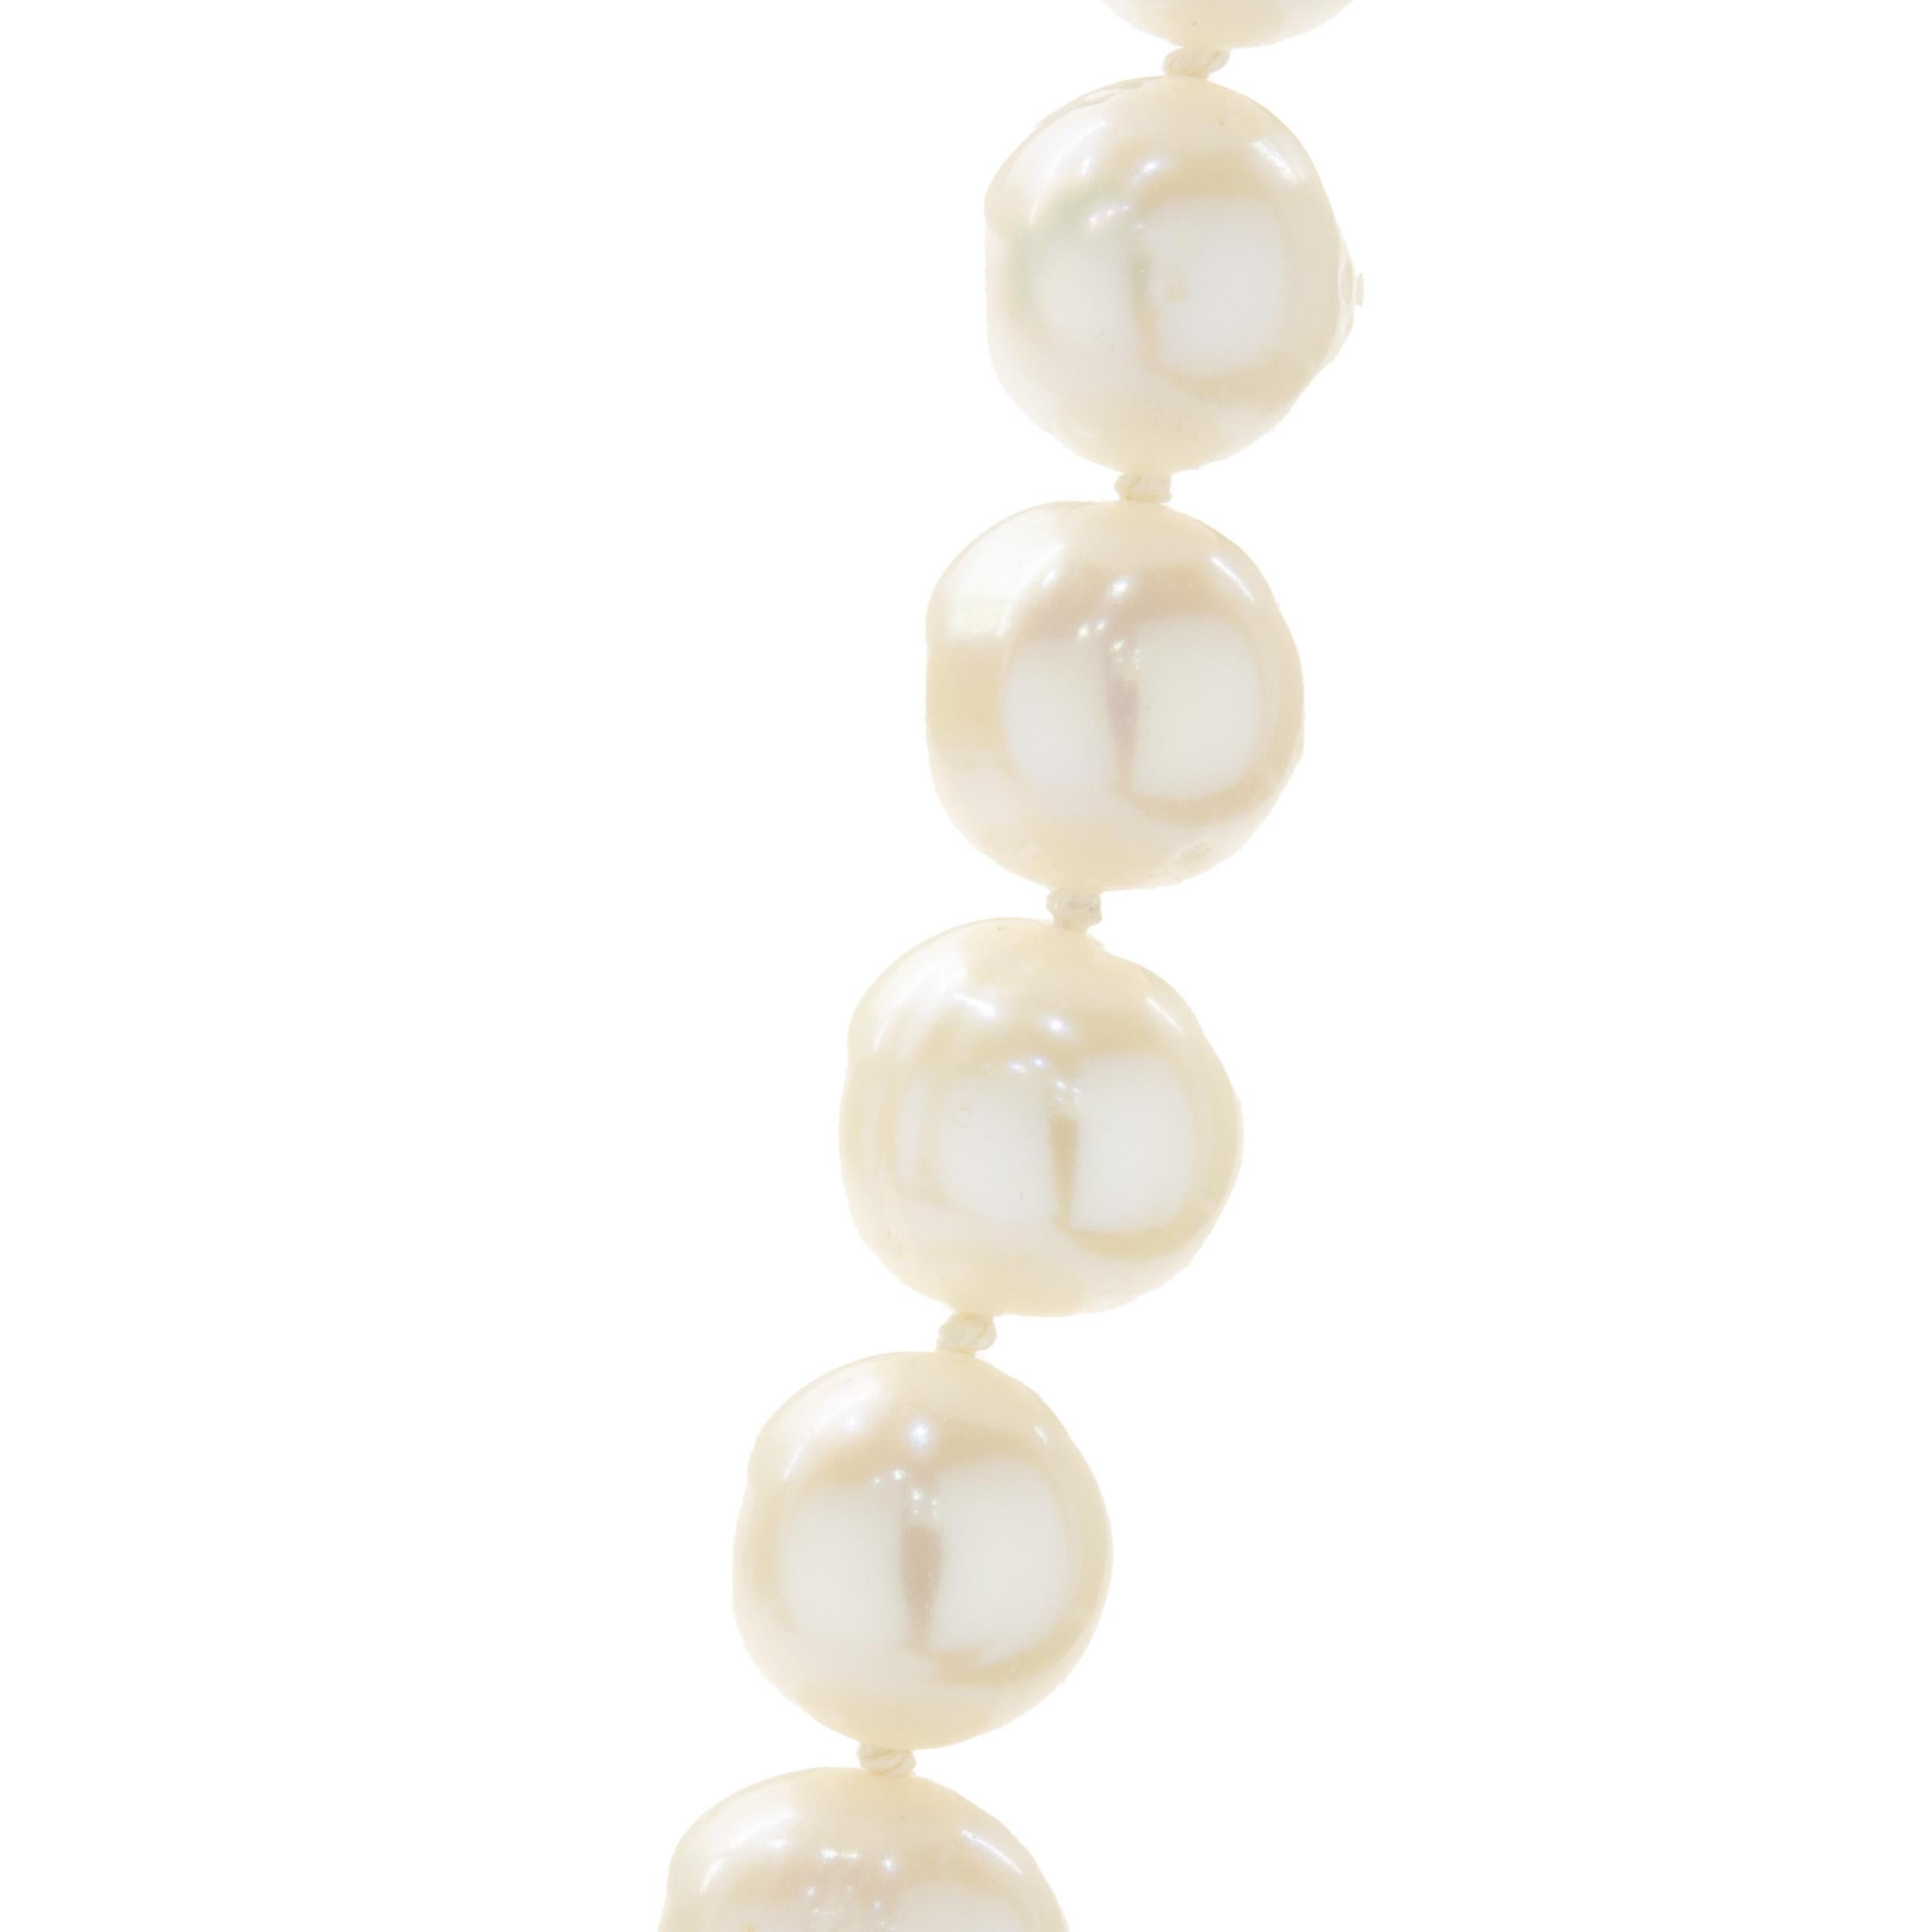 Designer: Custom
Material: 14K yellow gold / pearl
Dimensions: necklace measures 16-inches in length 
Weight: 38.52 grams